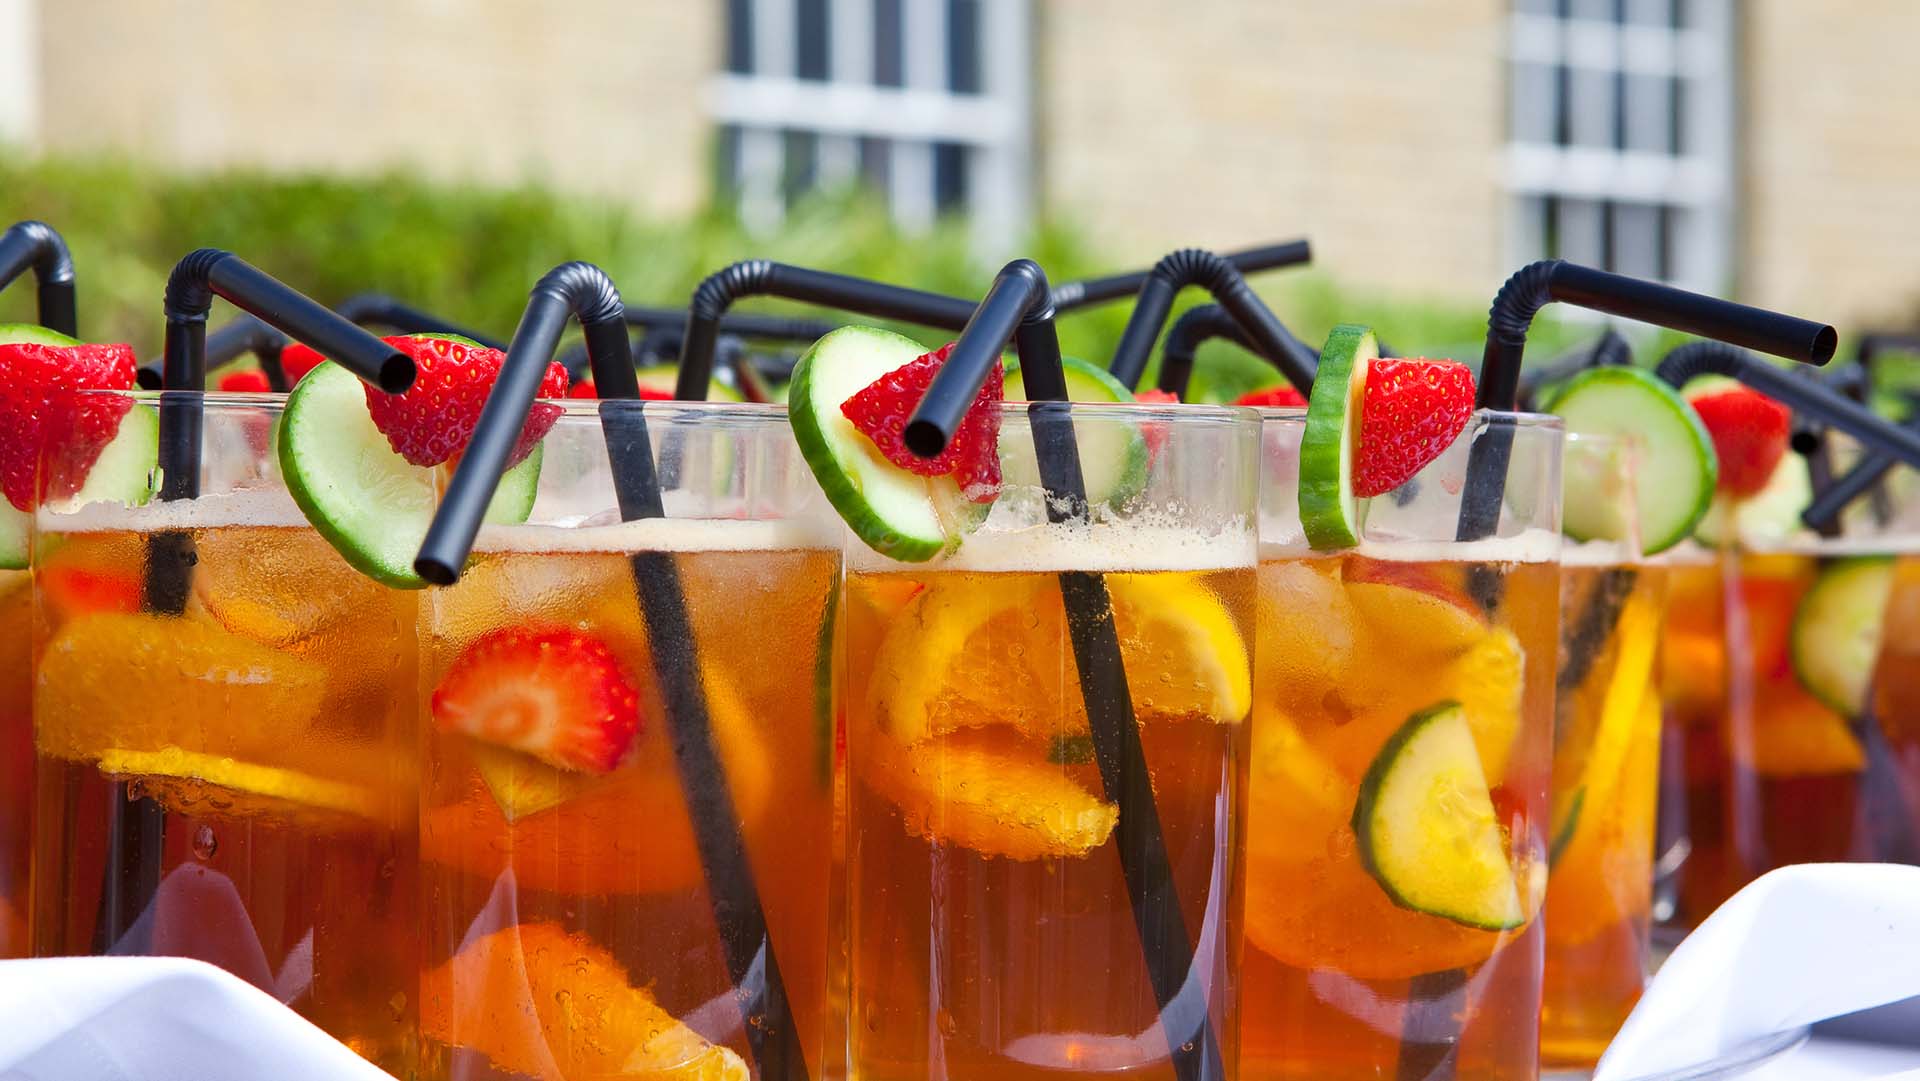 Glasses of Pimms on white tablecloth at garden party